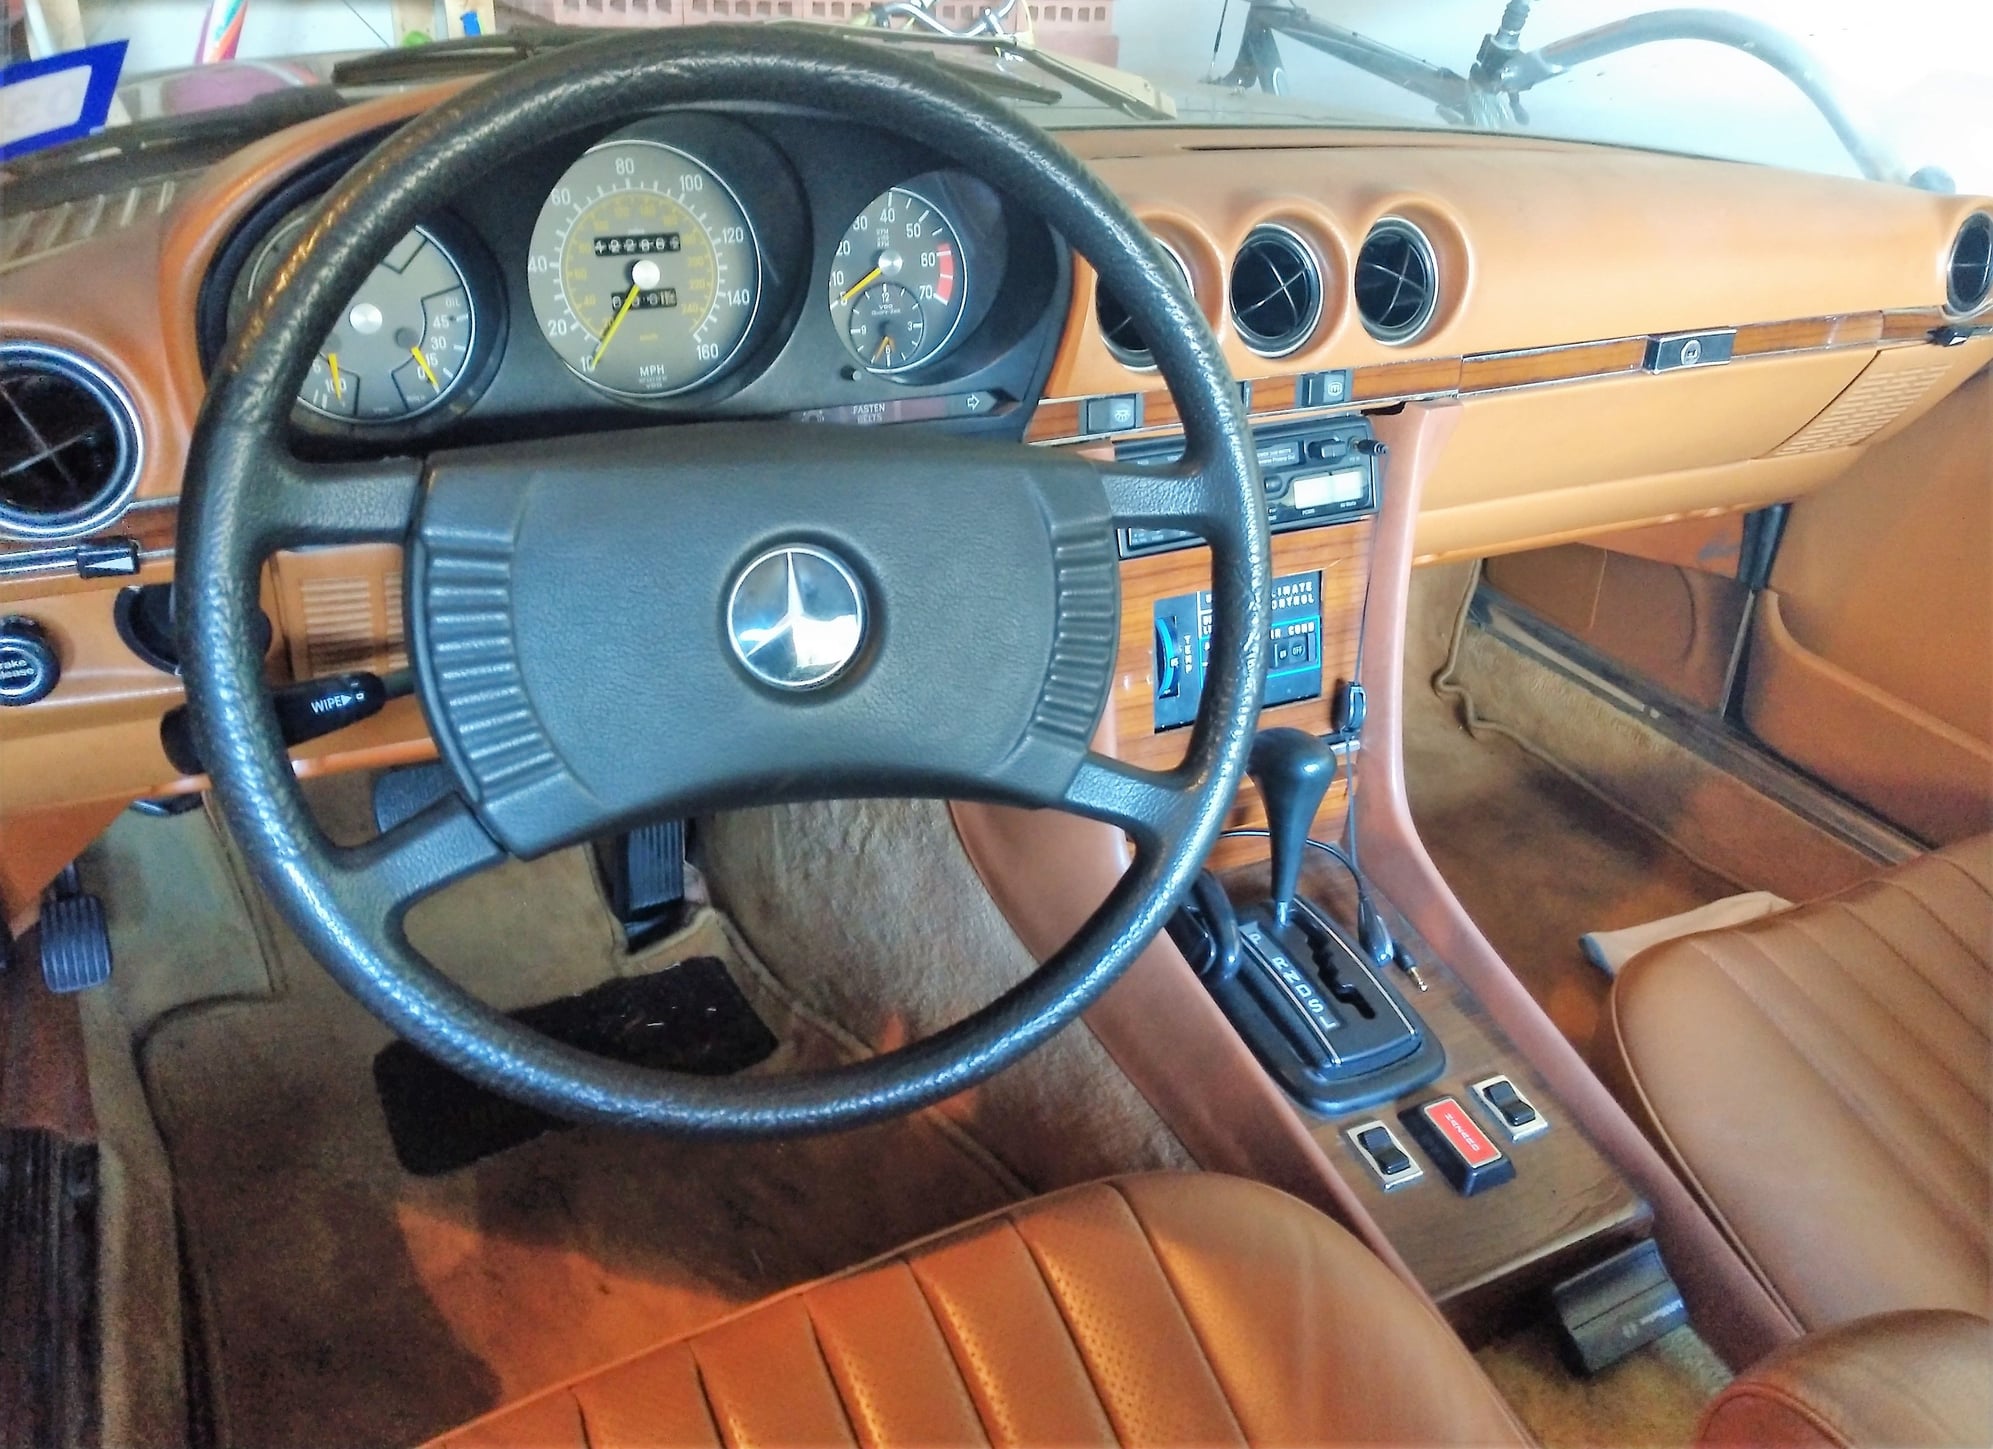 1979 Mercedes-Benz 450SL - 1979 450SL for sale - Used - VIN 10704412057279 - 135,000 Miles - 8 cyl - 2WD - Automatic - Convertible - Black - Houston, TX 77494, United States